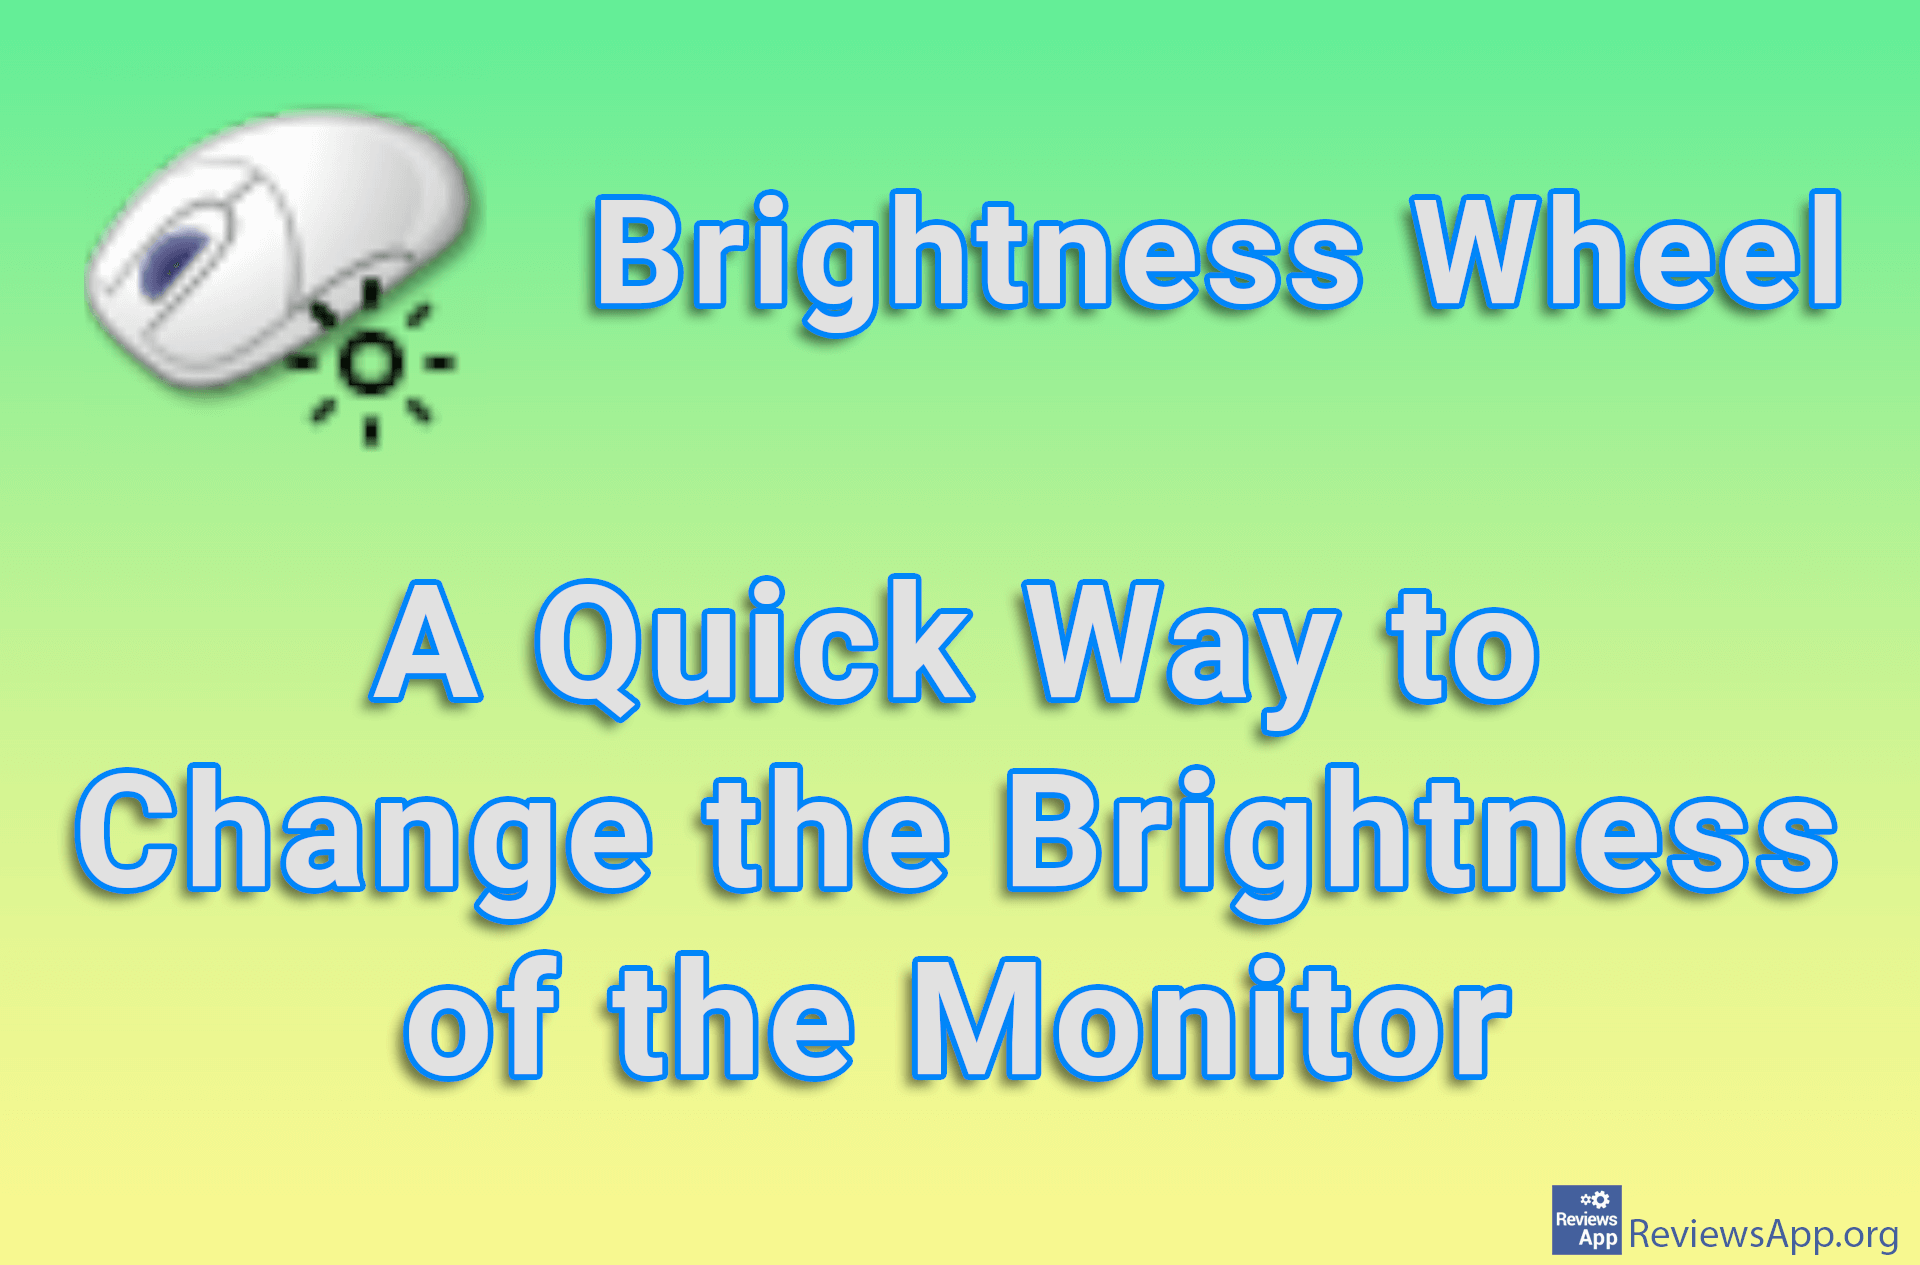 Brightness Wheel – A Quick Way to Change the Brightness of the Monitor